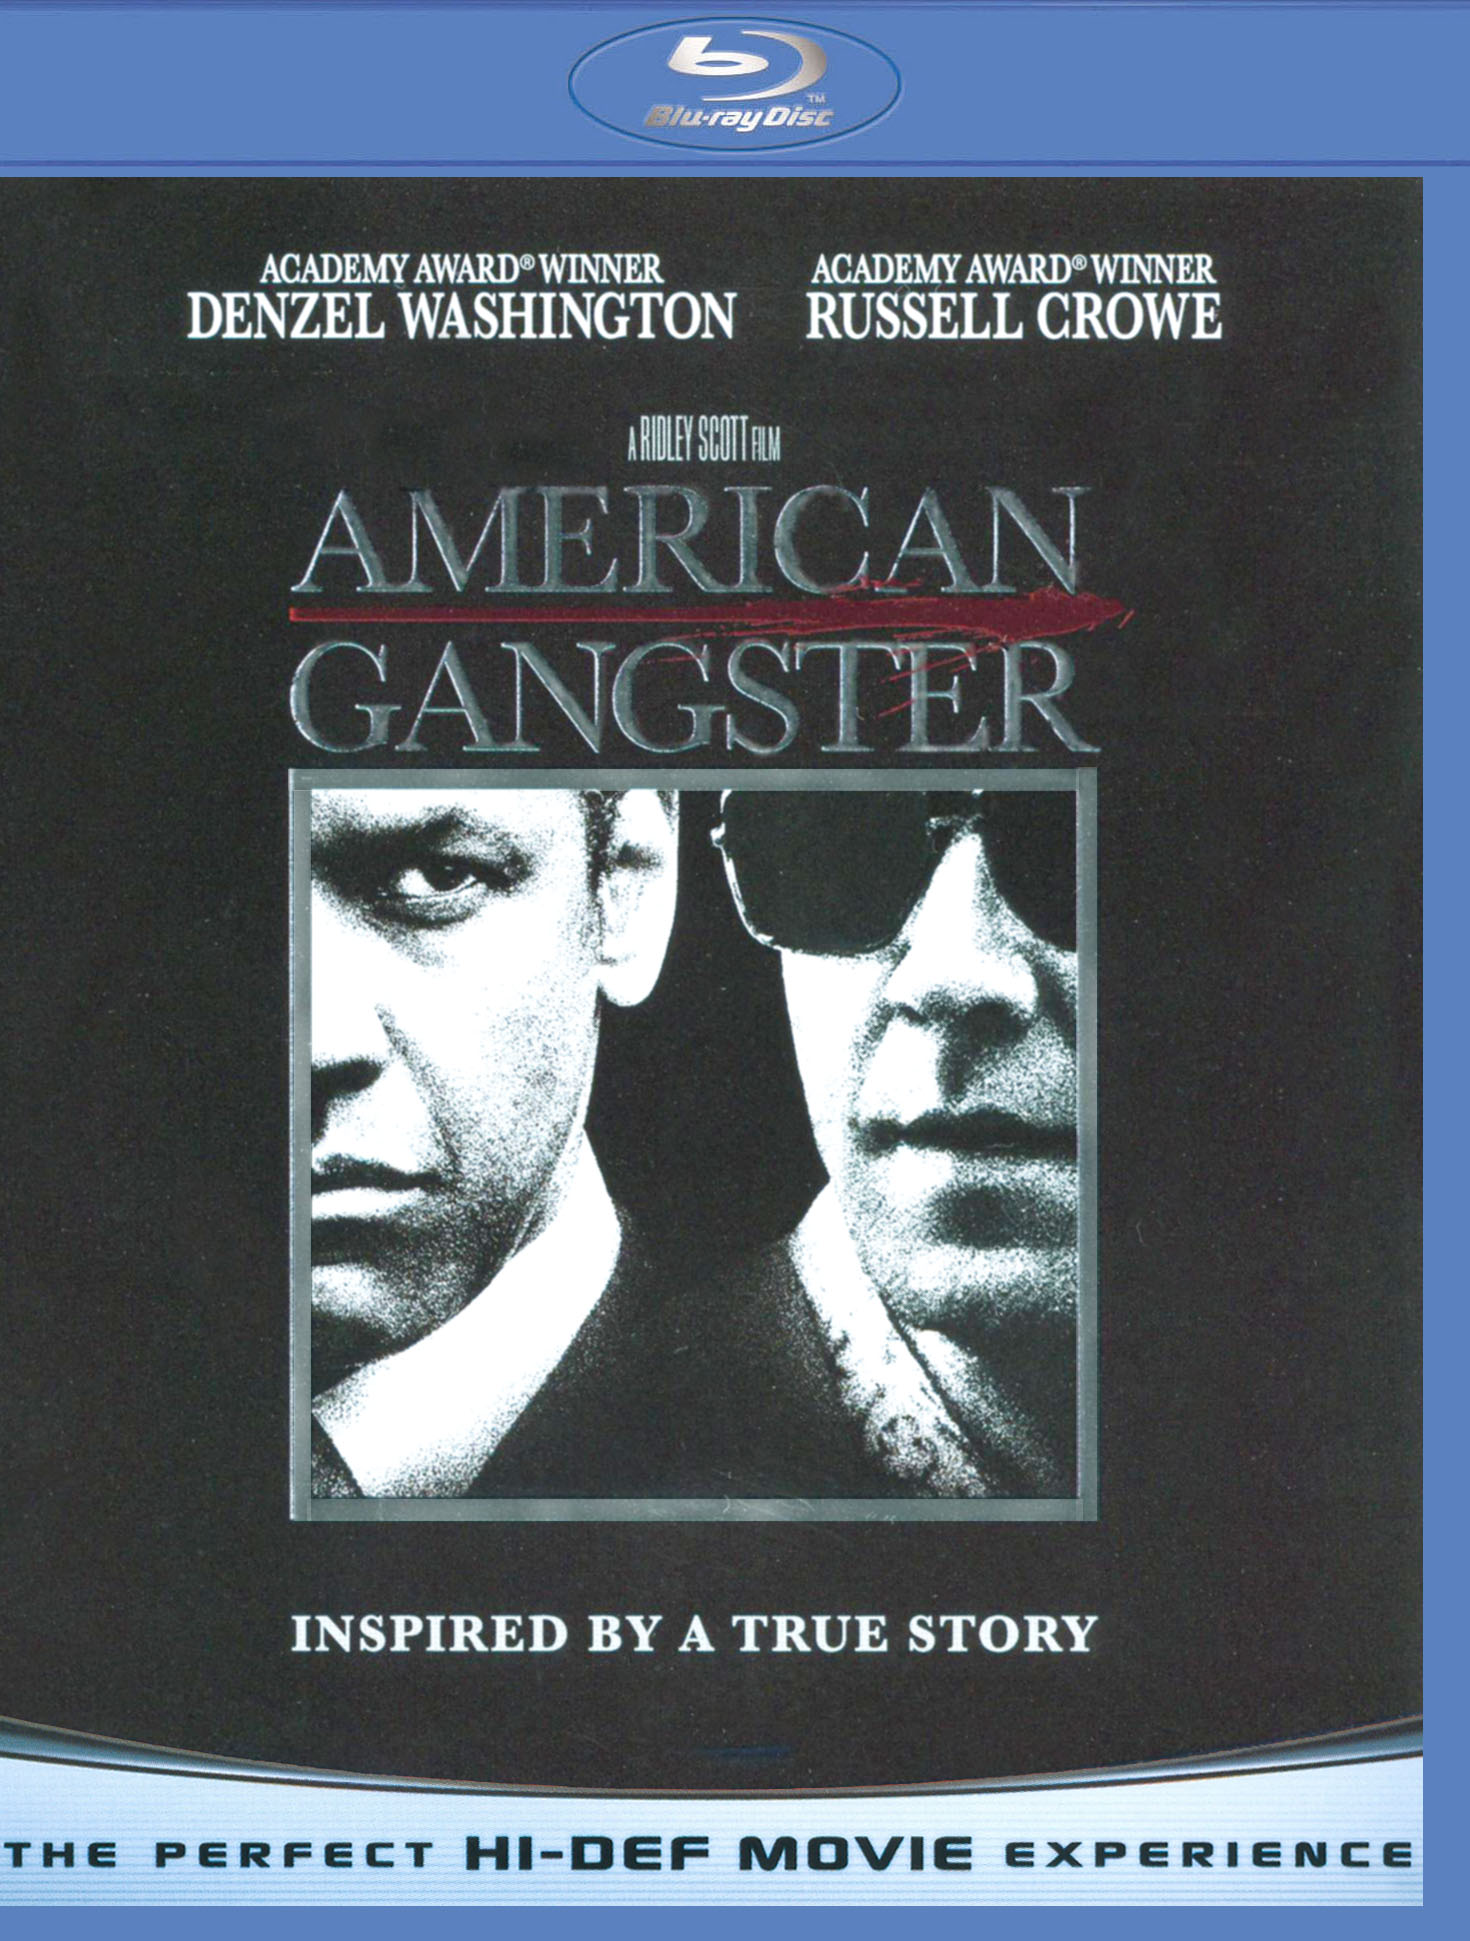 American Gangster [Blu-ray] [Unrated] [2007] - Best Buy